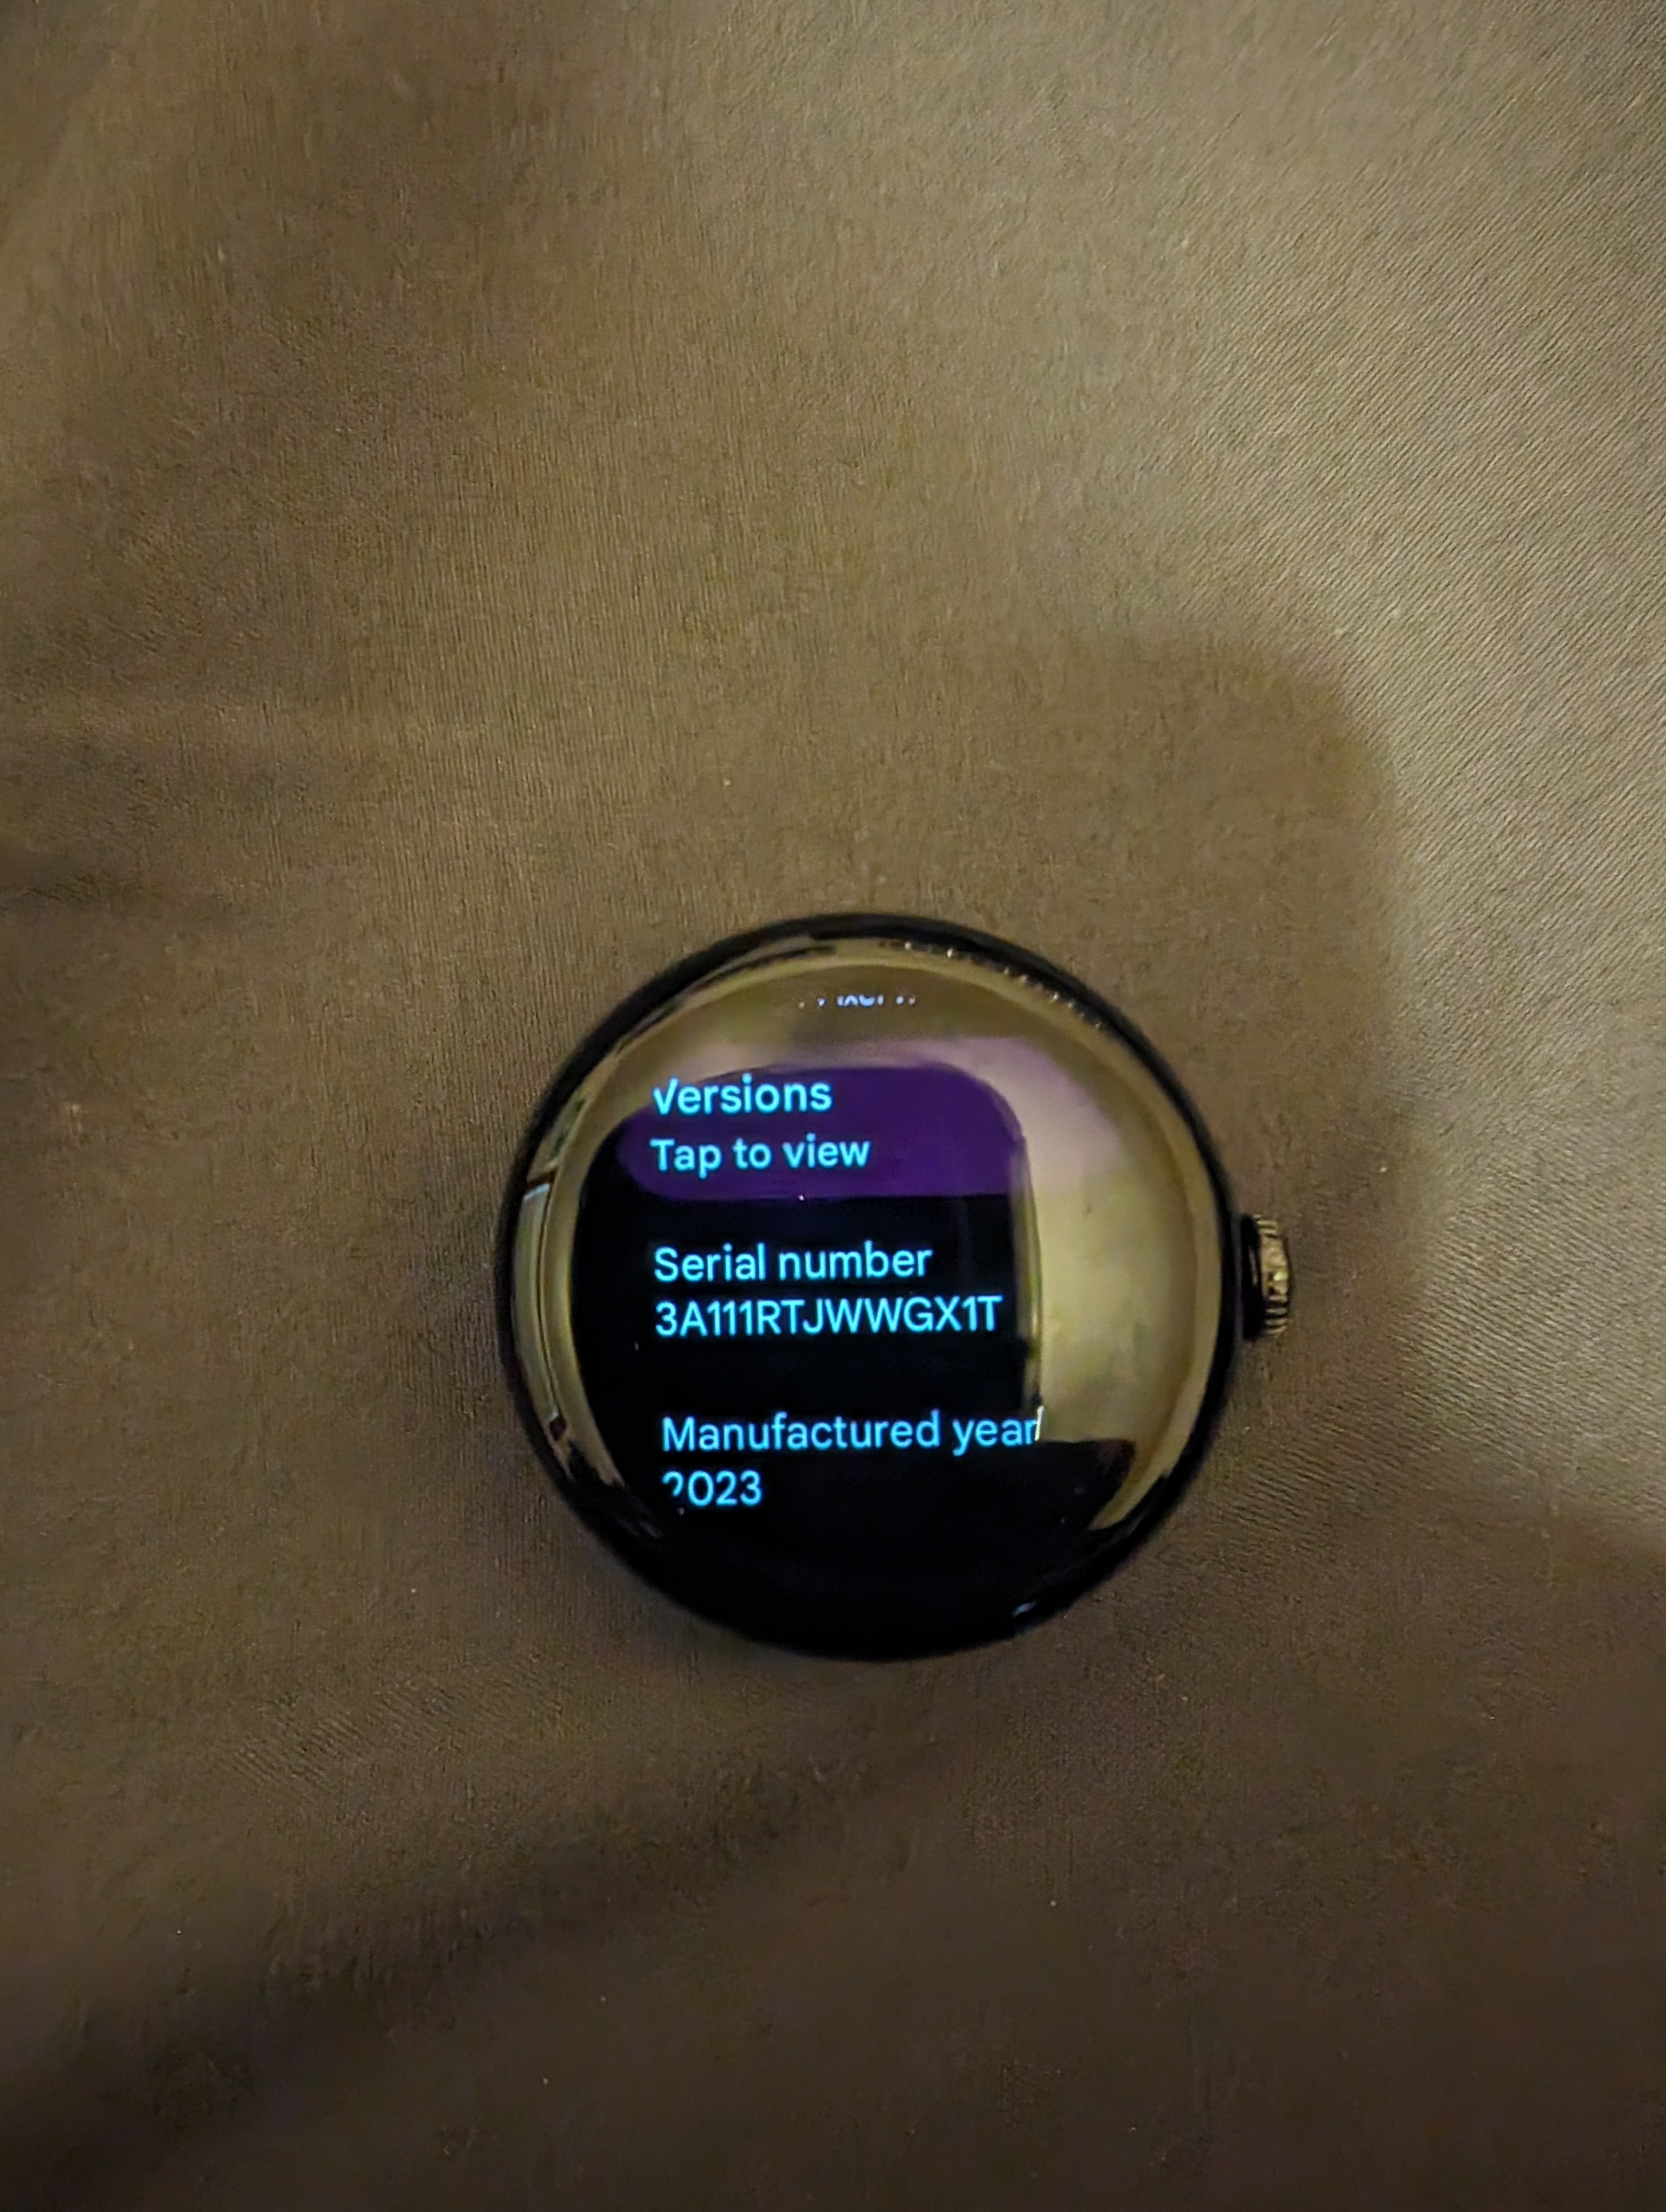 Google sold me a watch without an imei number - Google Pixel Watch